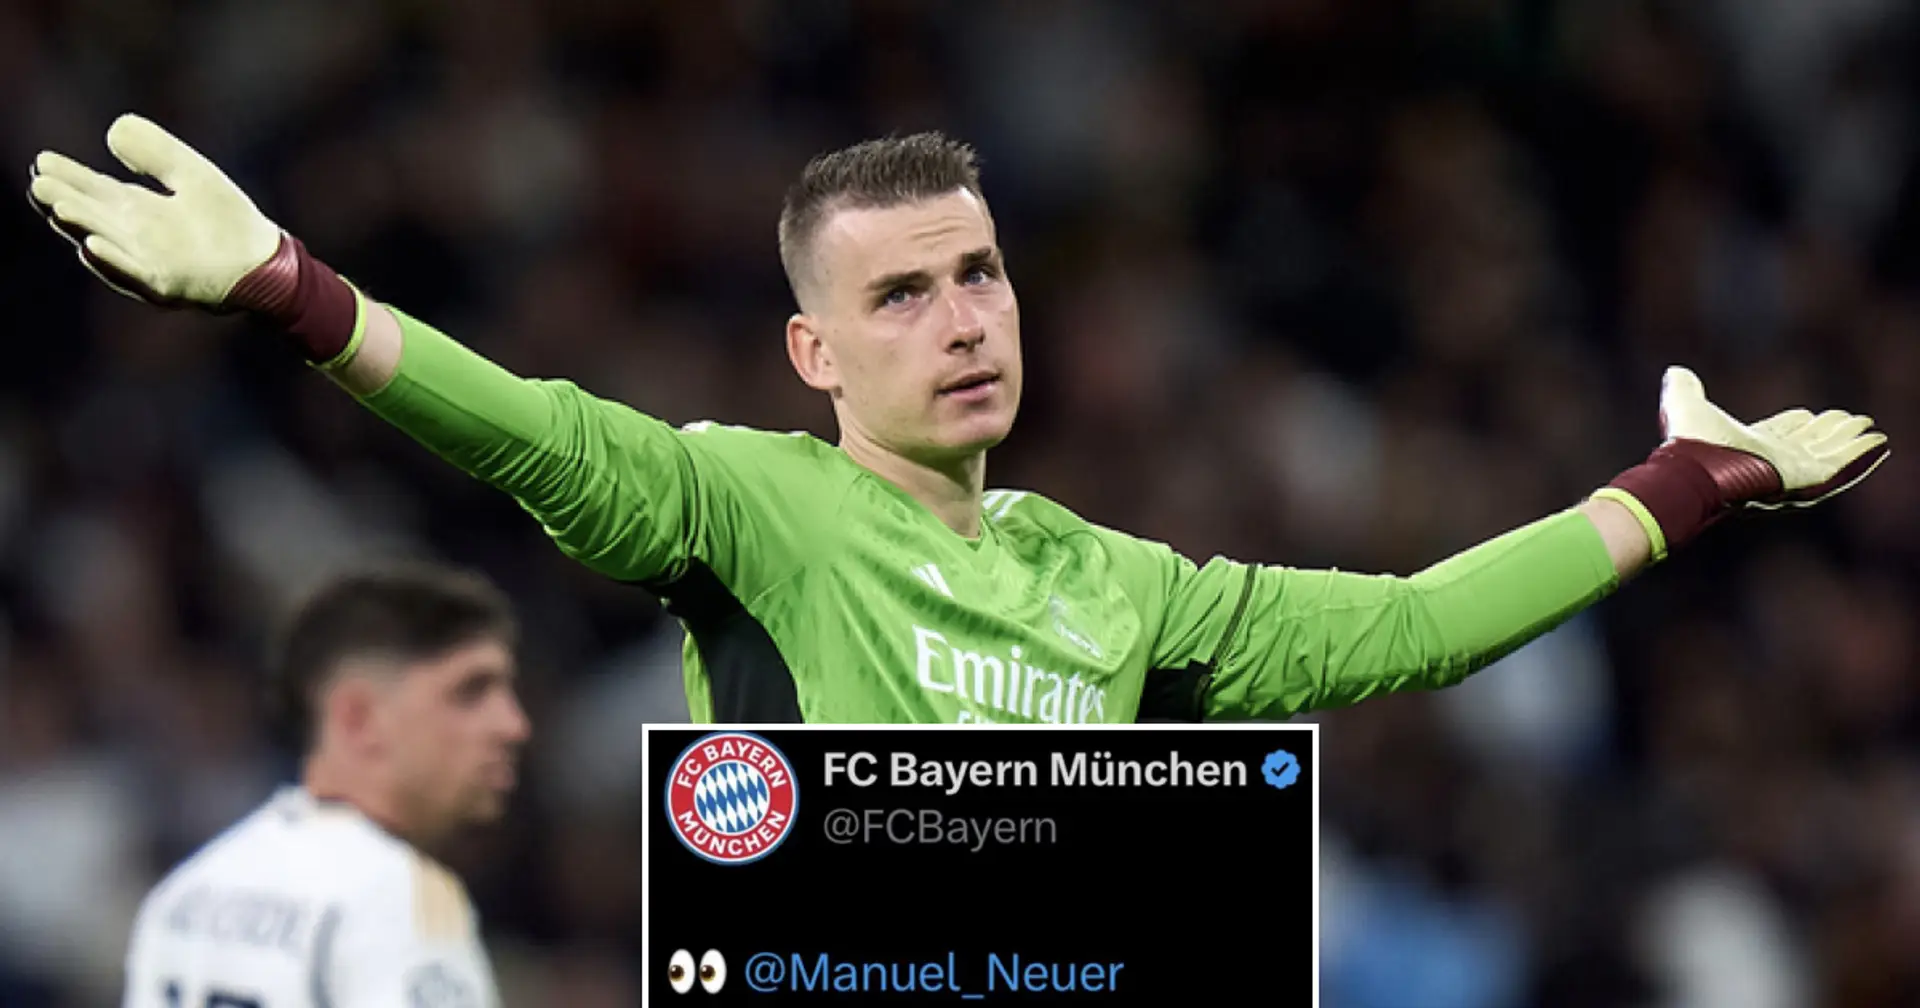 Bayern's official account comes up with epic fail before Real Madrid game – Madridistas will love it